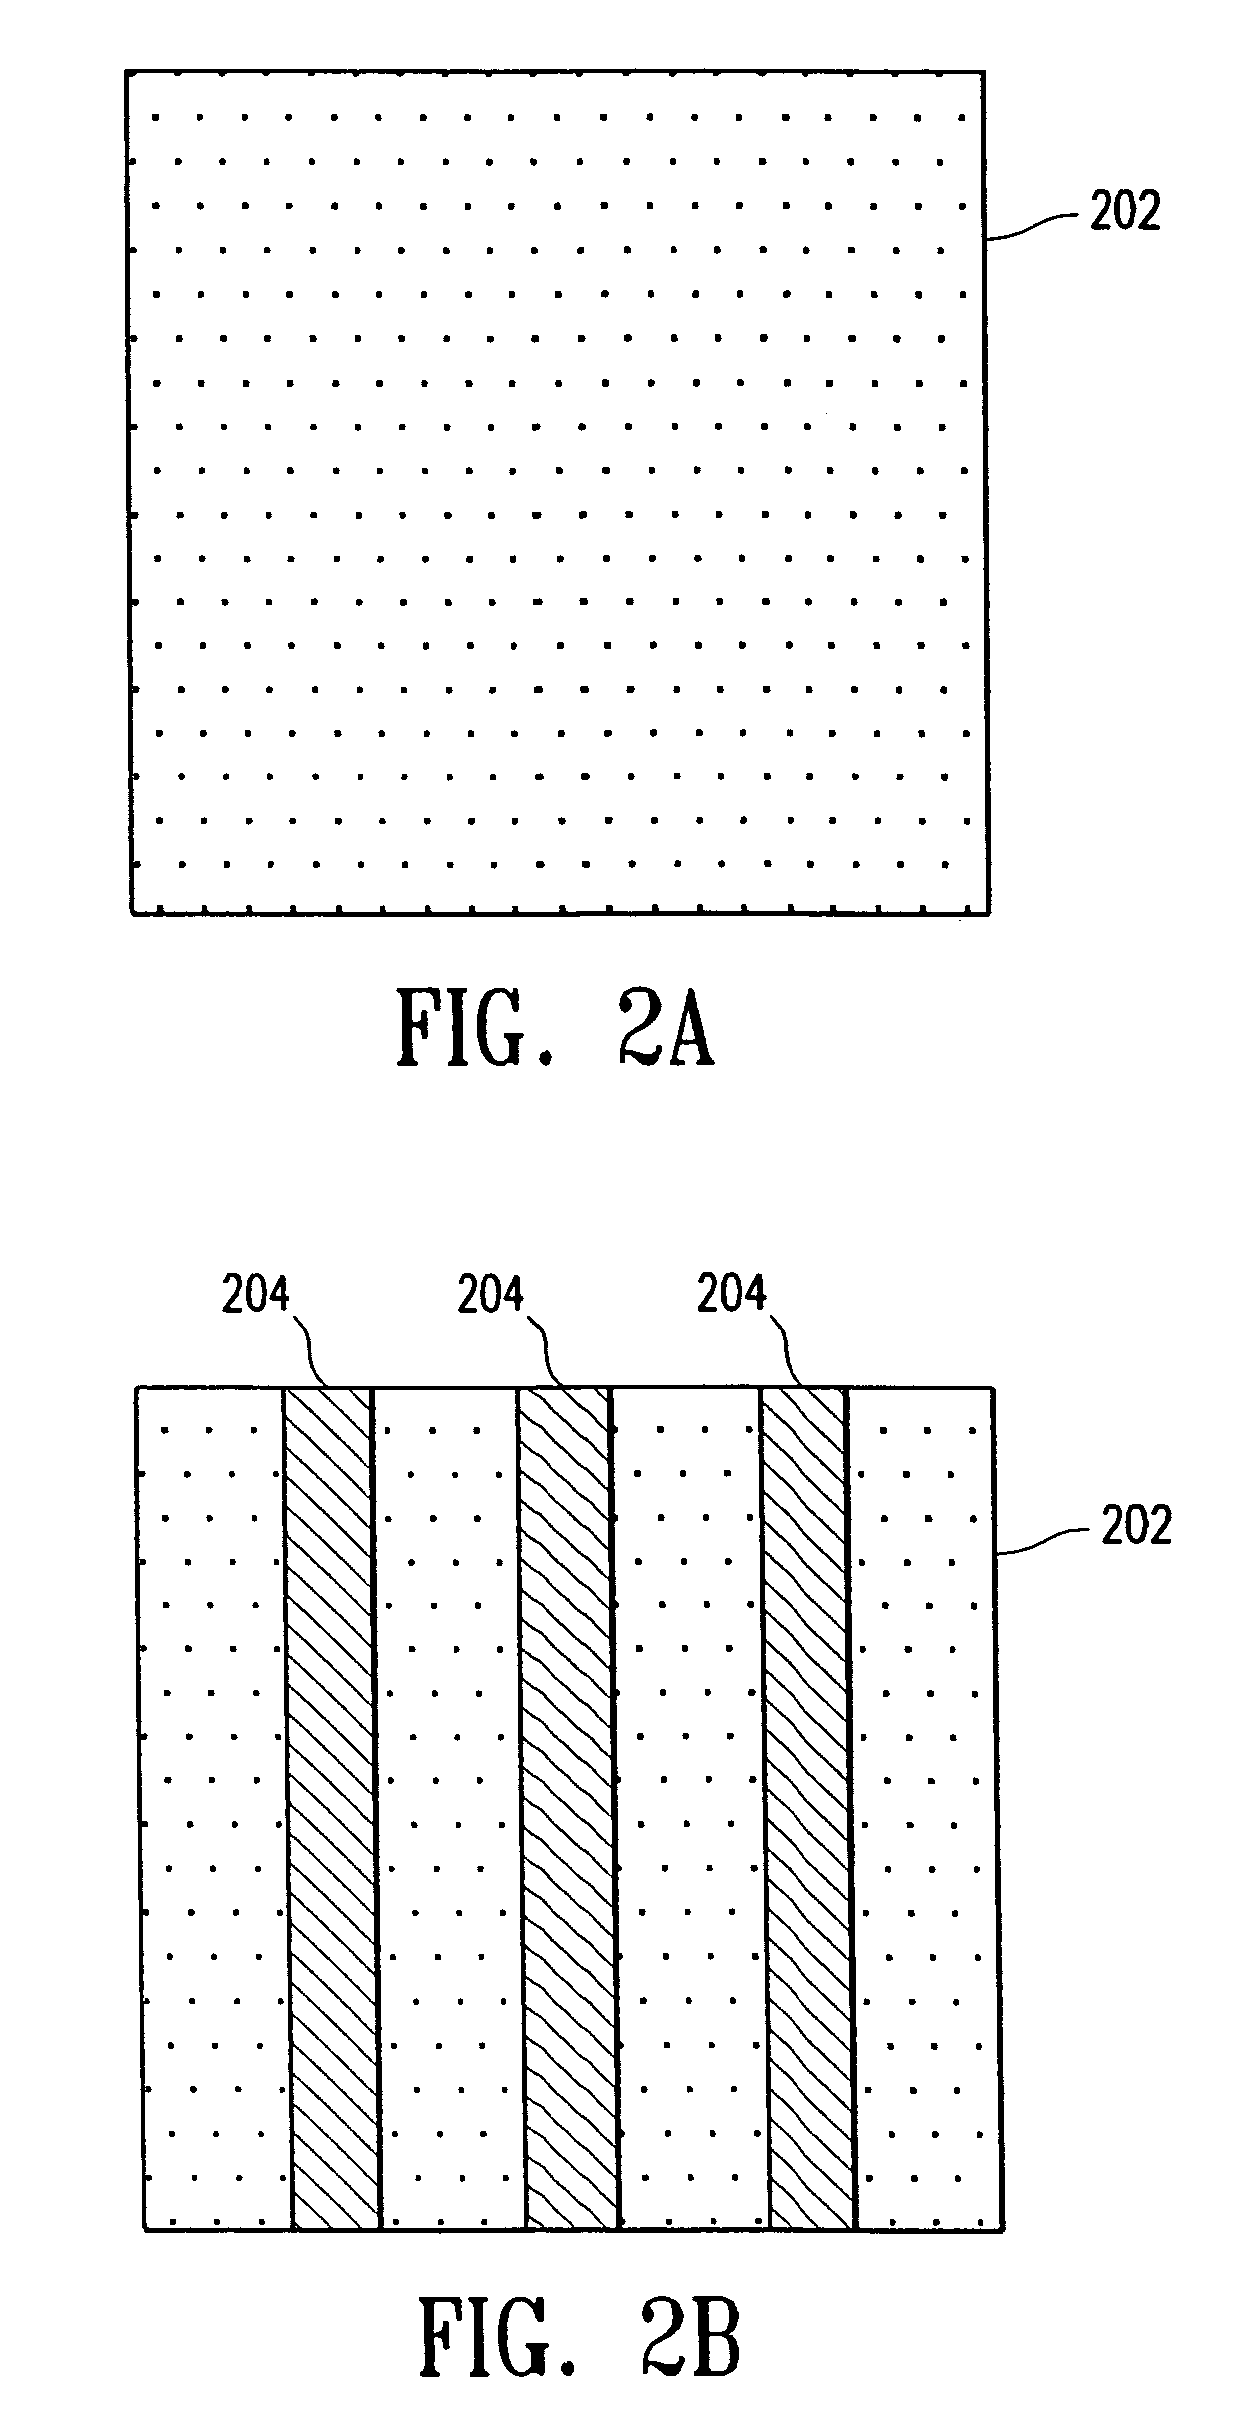 Process for forming a patterned thin film structure on a substrate